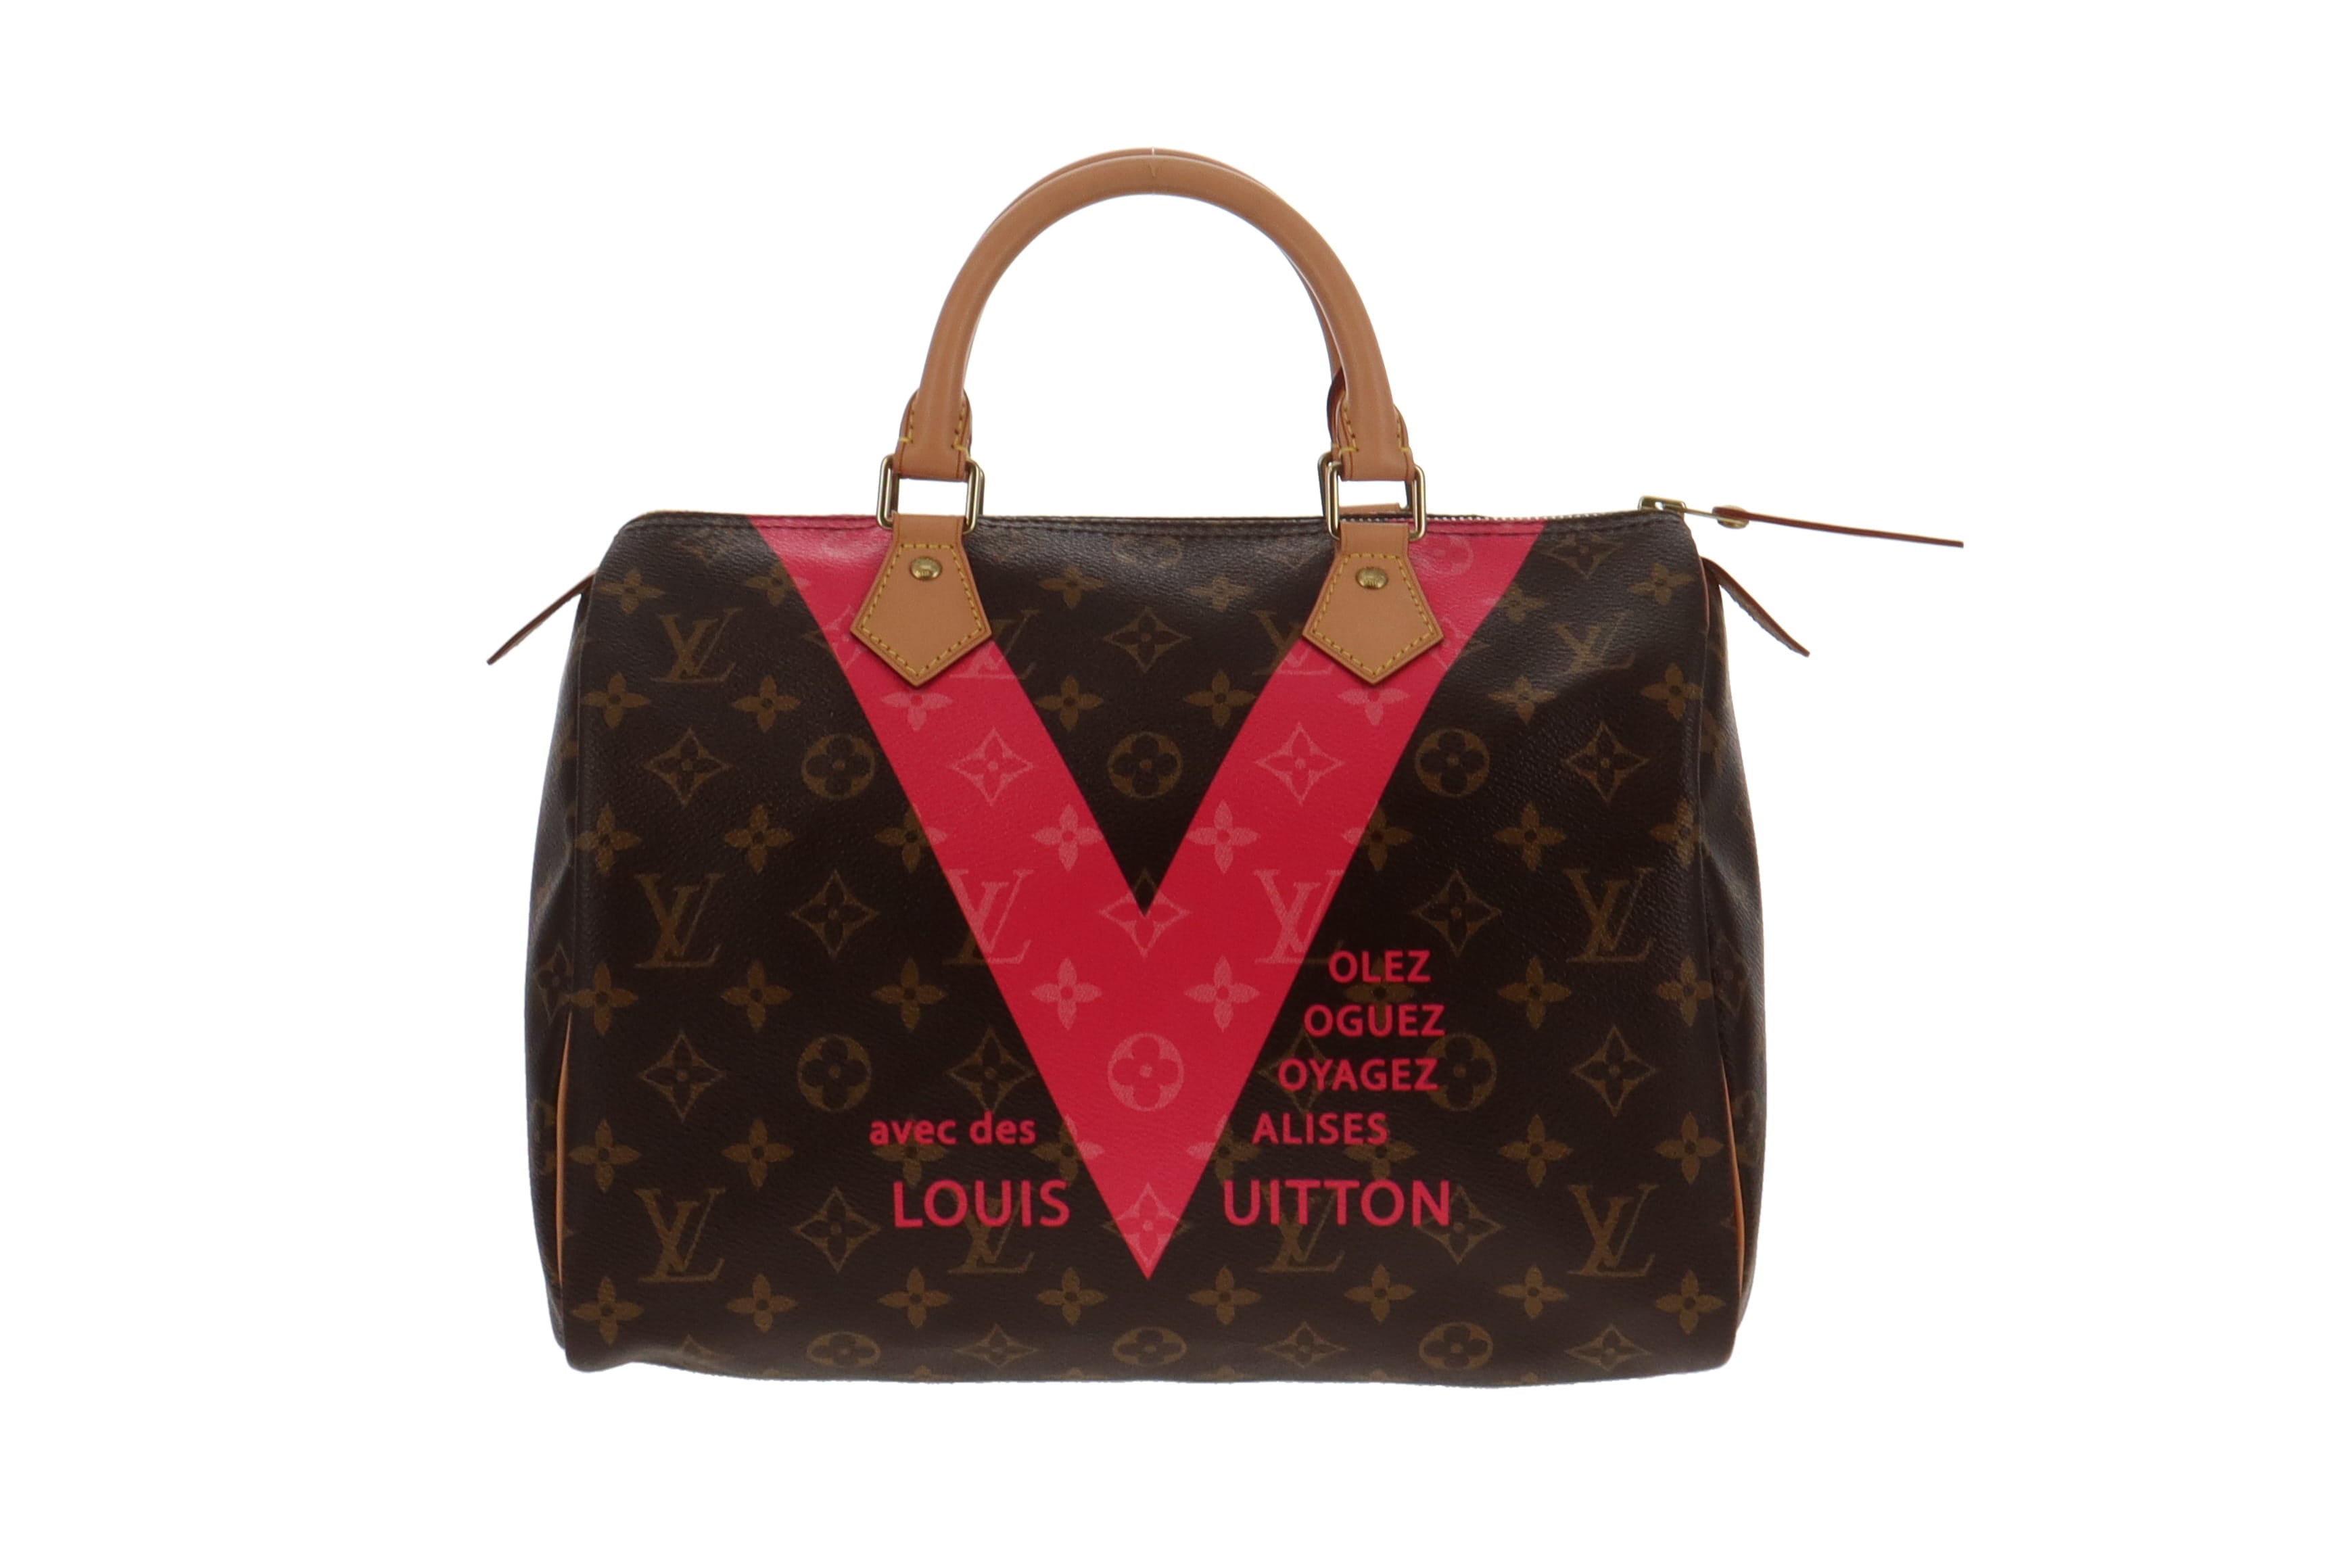 LOUIS VUITTON  PATCHES SPEEDY 30 BANDOULIERE OF DAMIER EBENE CANVAS WITH  POLISHED BRASS HARDWARE  Handbags  Accessories  2020  Sothebys